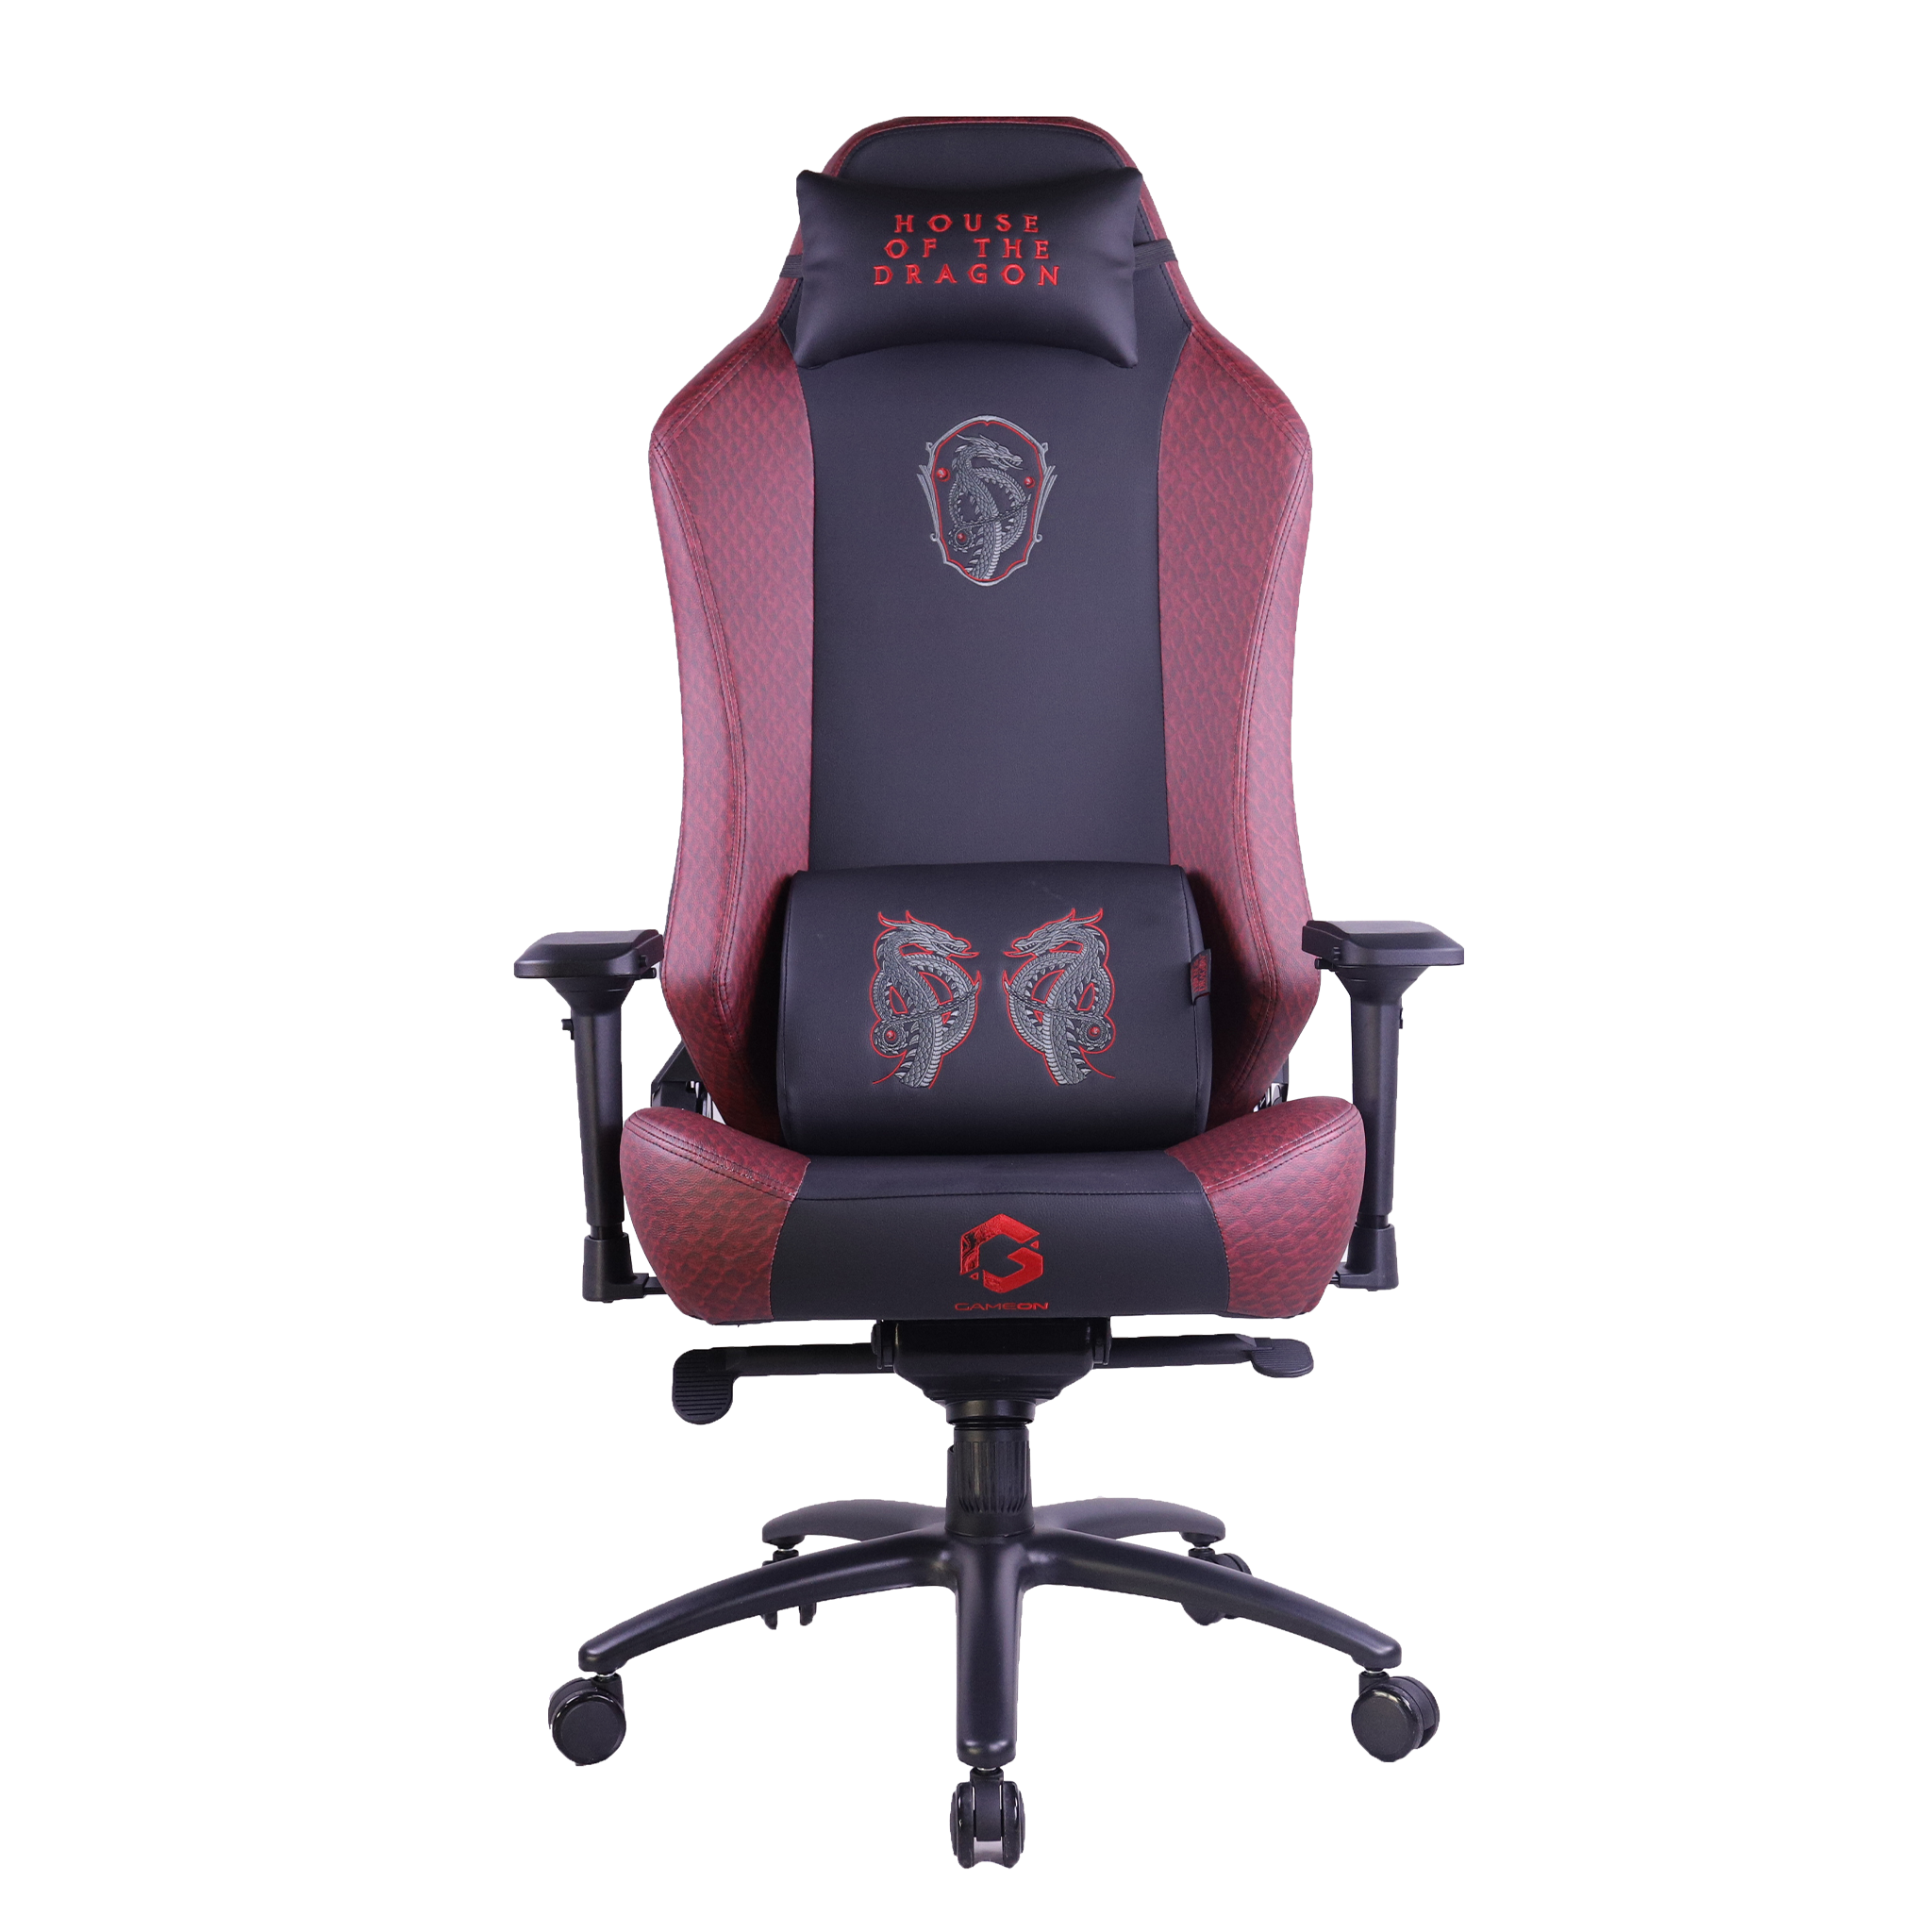 Buy GAMEON x DC Licensed Gaming Chair Online  House of The Dragon Themed  Gaming Chair –